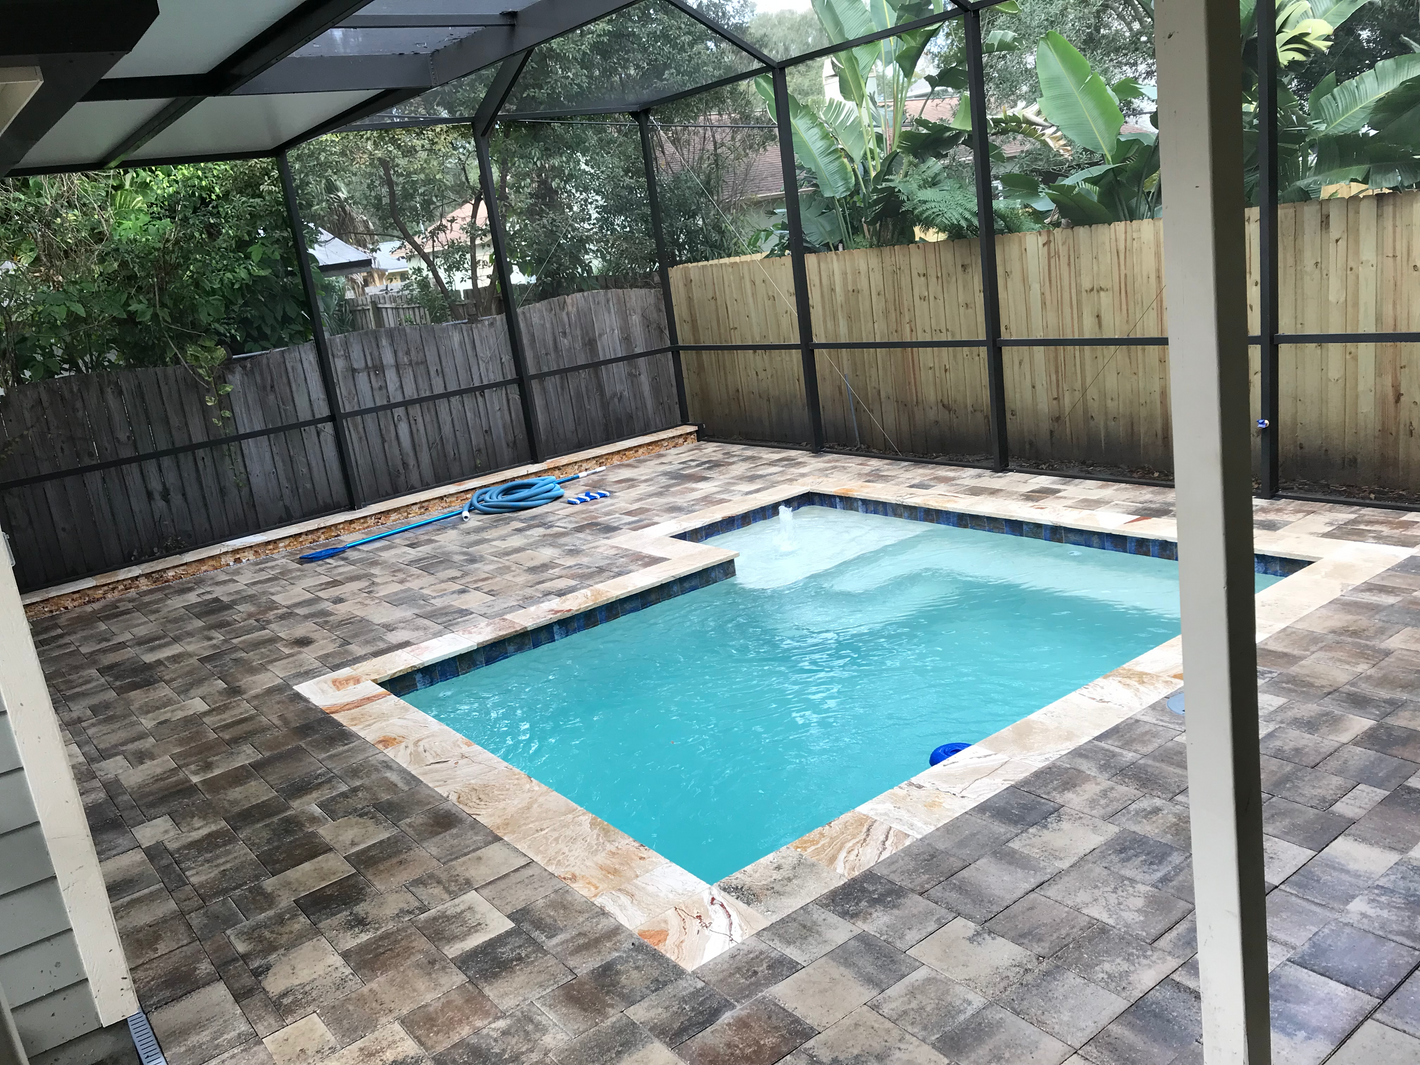 Paver and travertine pool deck and coping plus retaining wall with stone tile